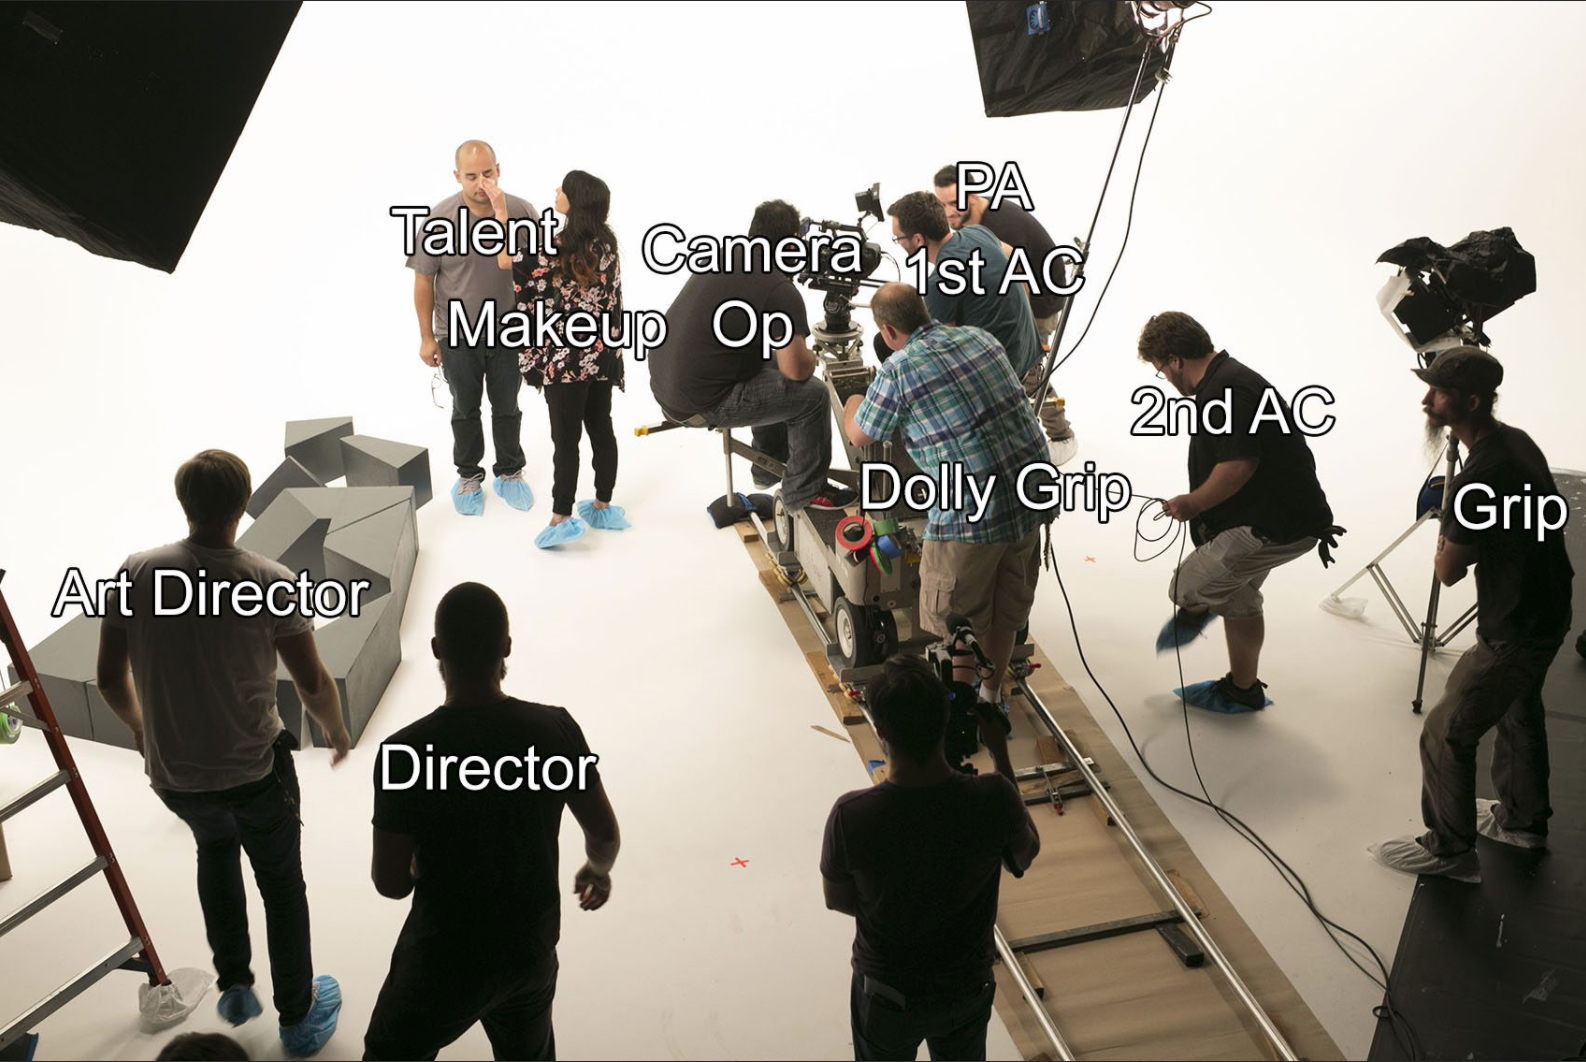 Image shows people in various roles in filmmaking 